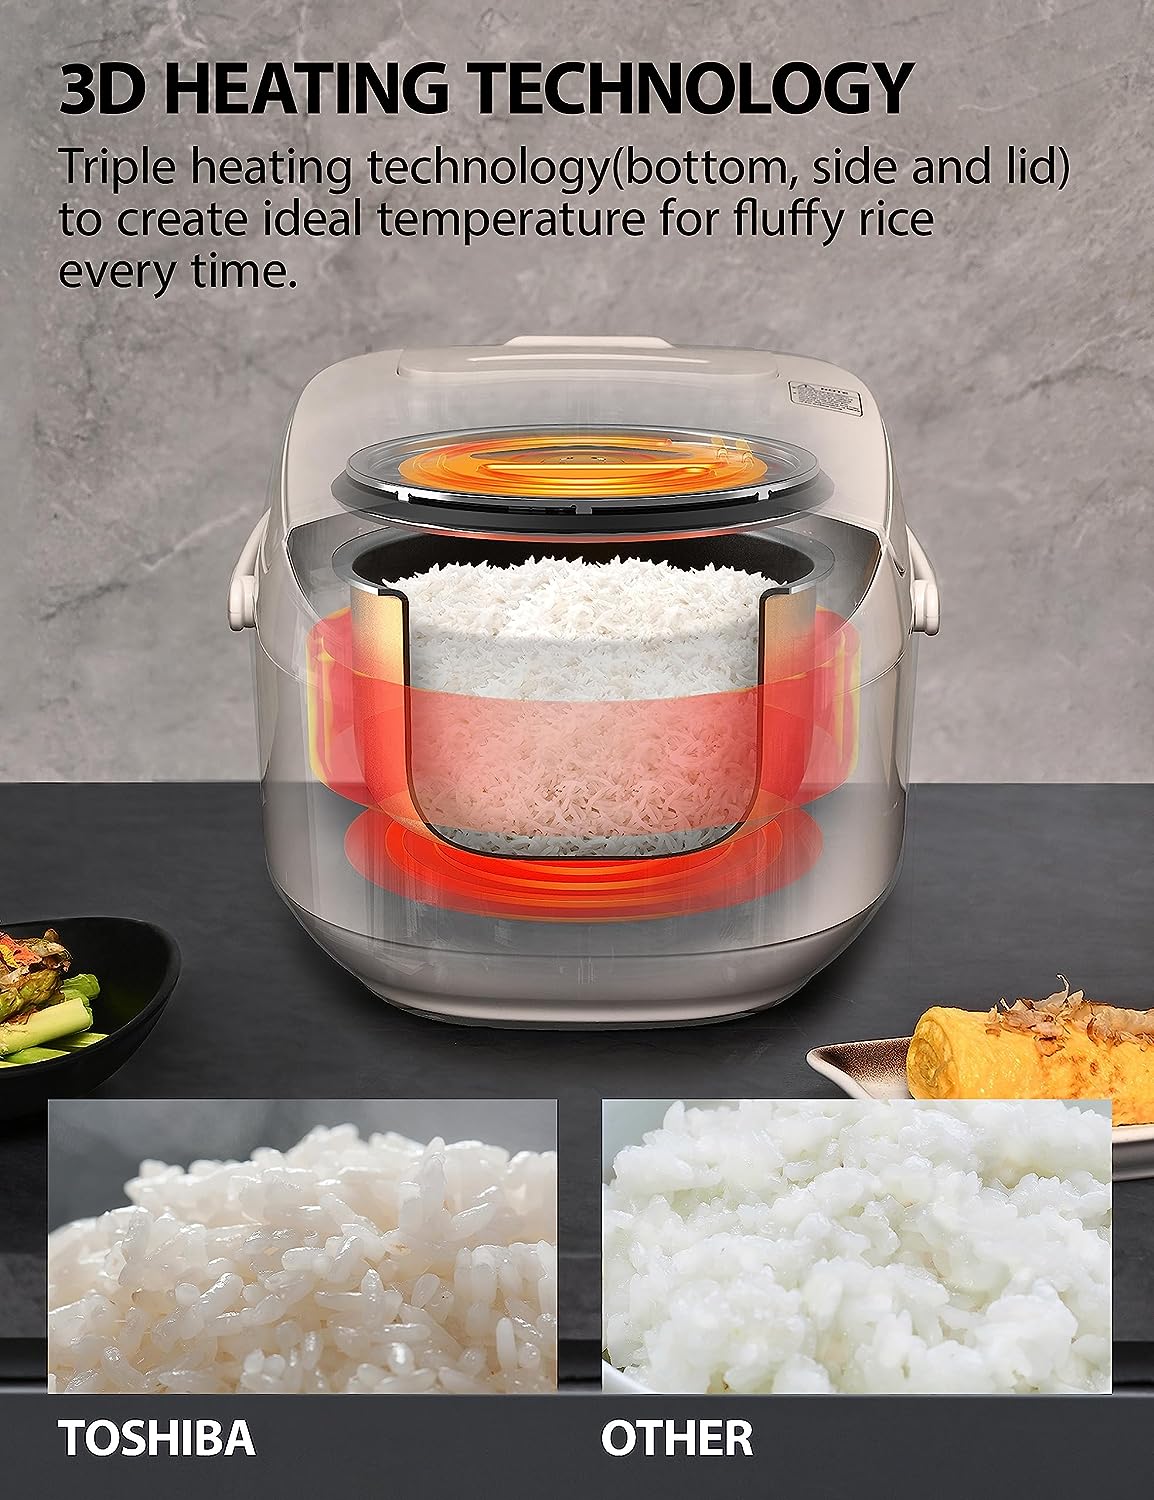 https://bigbigmart.com/wp-content/uploads/2023/08/Toshiba-Rice-Cooker-6-Cup-Uncooked-%E2%80%93-Japanese-Rice-Cooker-with-Fuzzy-Logic-Technology-7-Cooking-Functions-Digital-Display-2-Delay-Timers-and-Auto-Keep-Warm-Non-Stick-Inner-Pot-White2.jpg